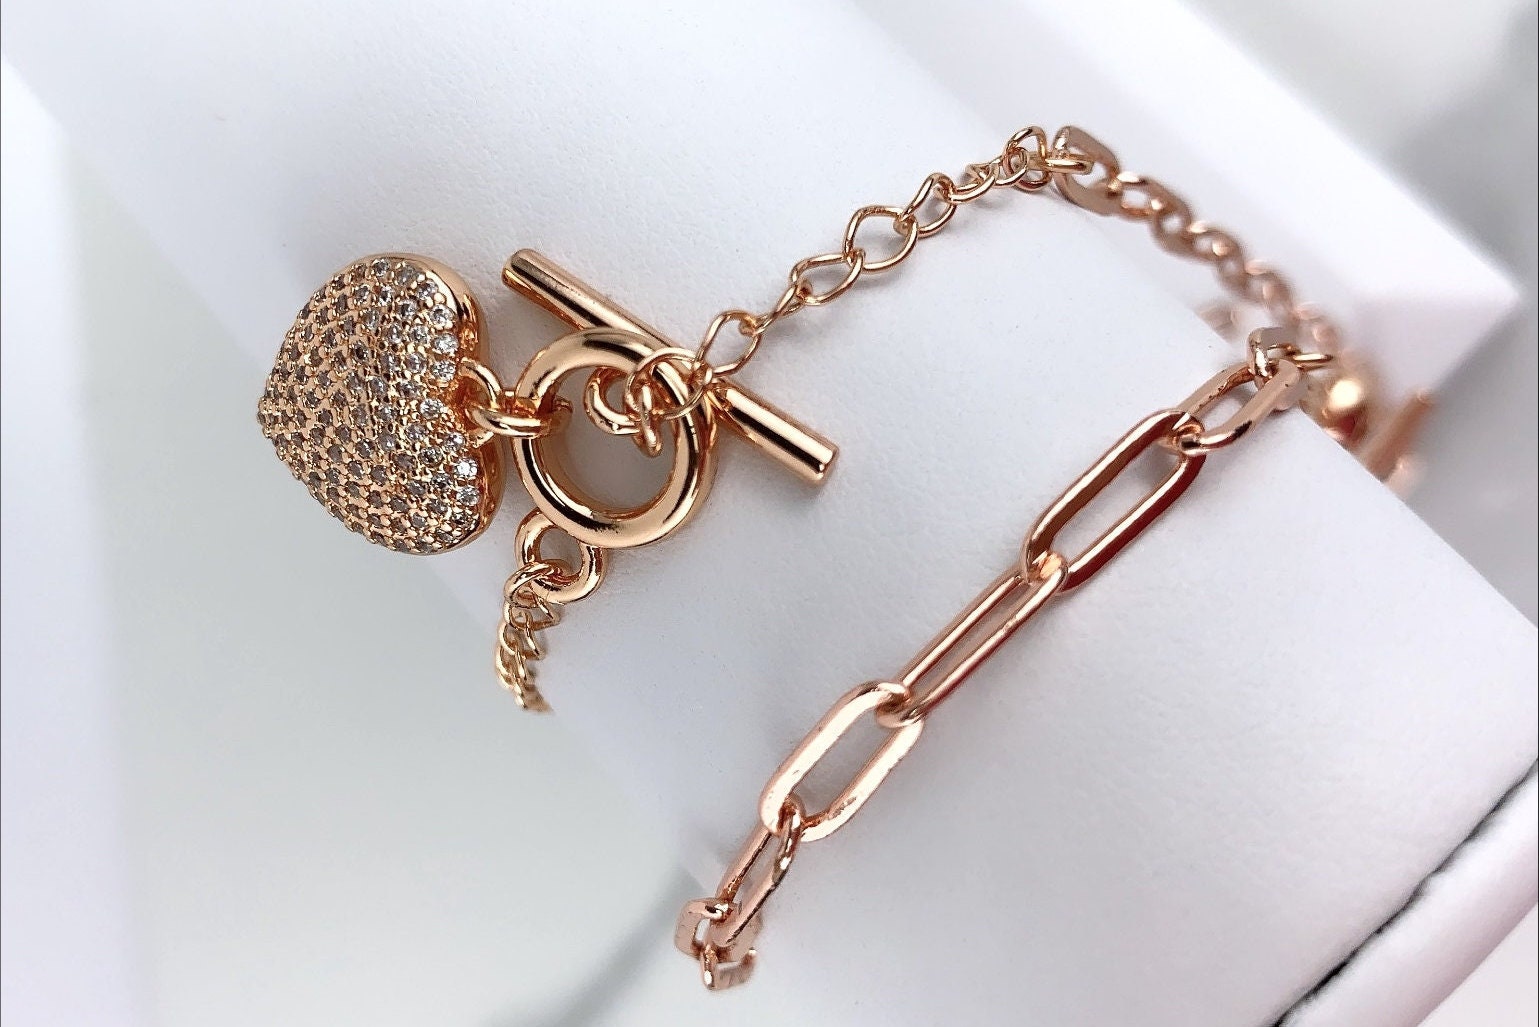 18k Rose Gold Filled Micro Pave Cubic Zirconia Puffy Heart Charm Necklace and Bracelet Set Featuring Toggle Clasp Wholesale Jewelry Supplies